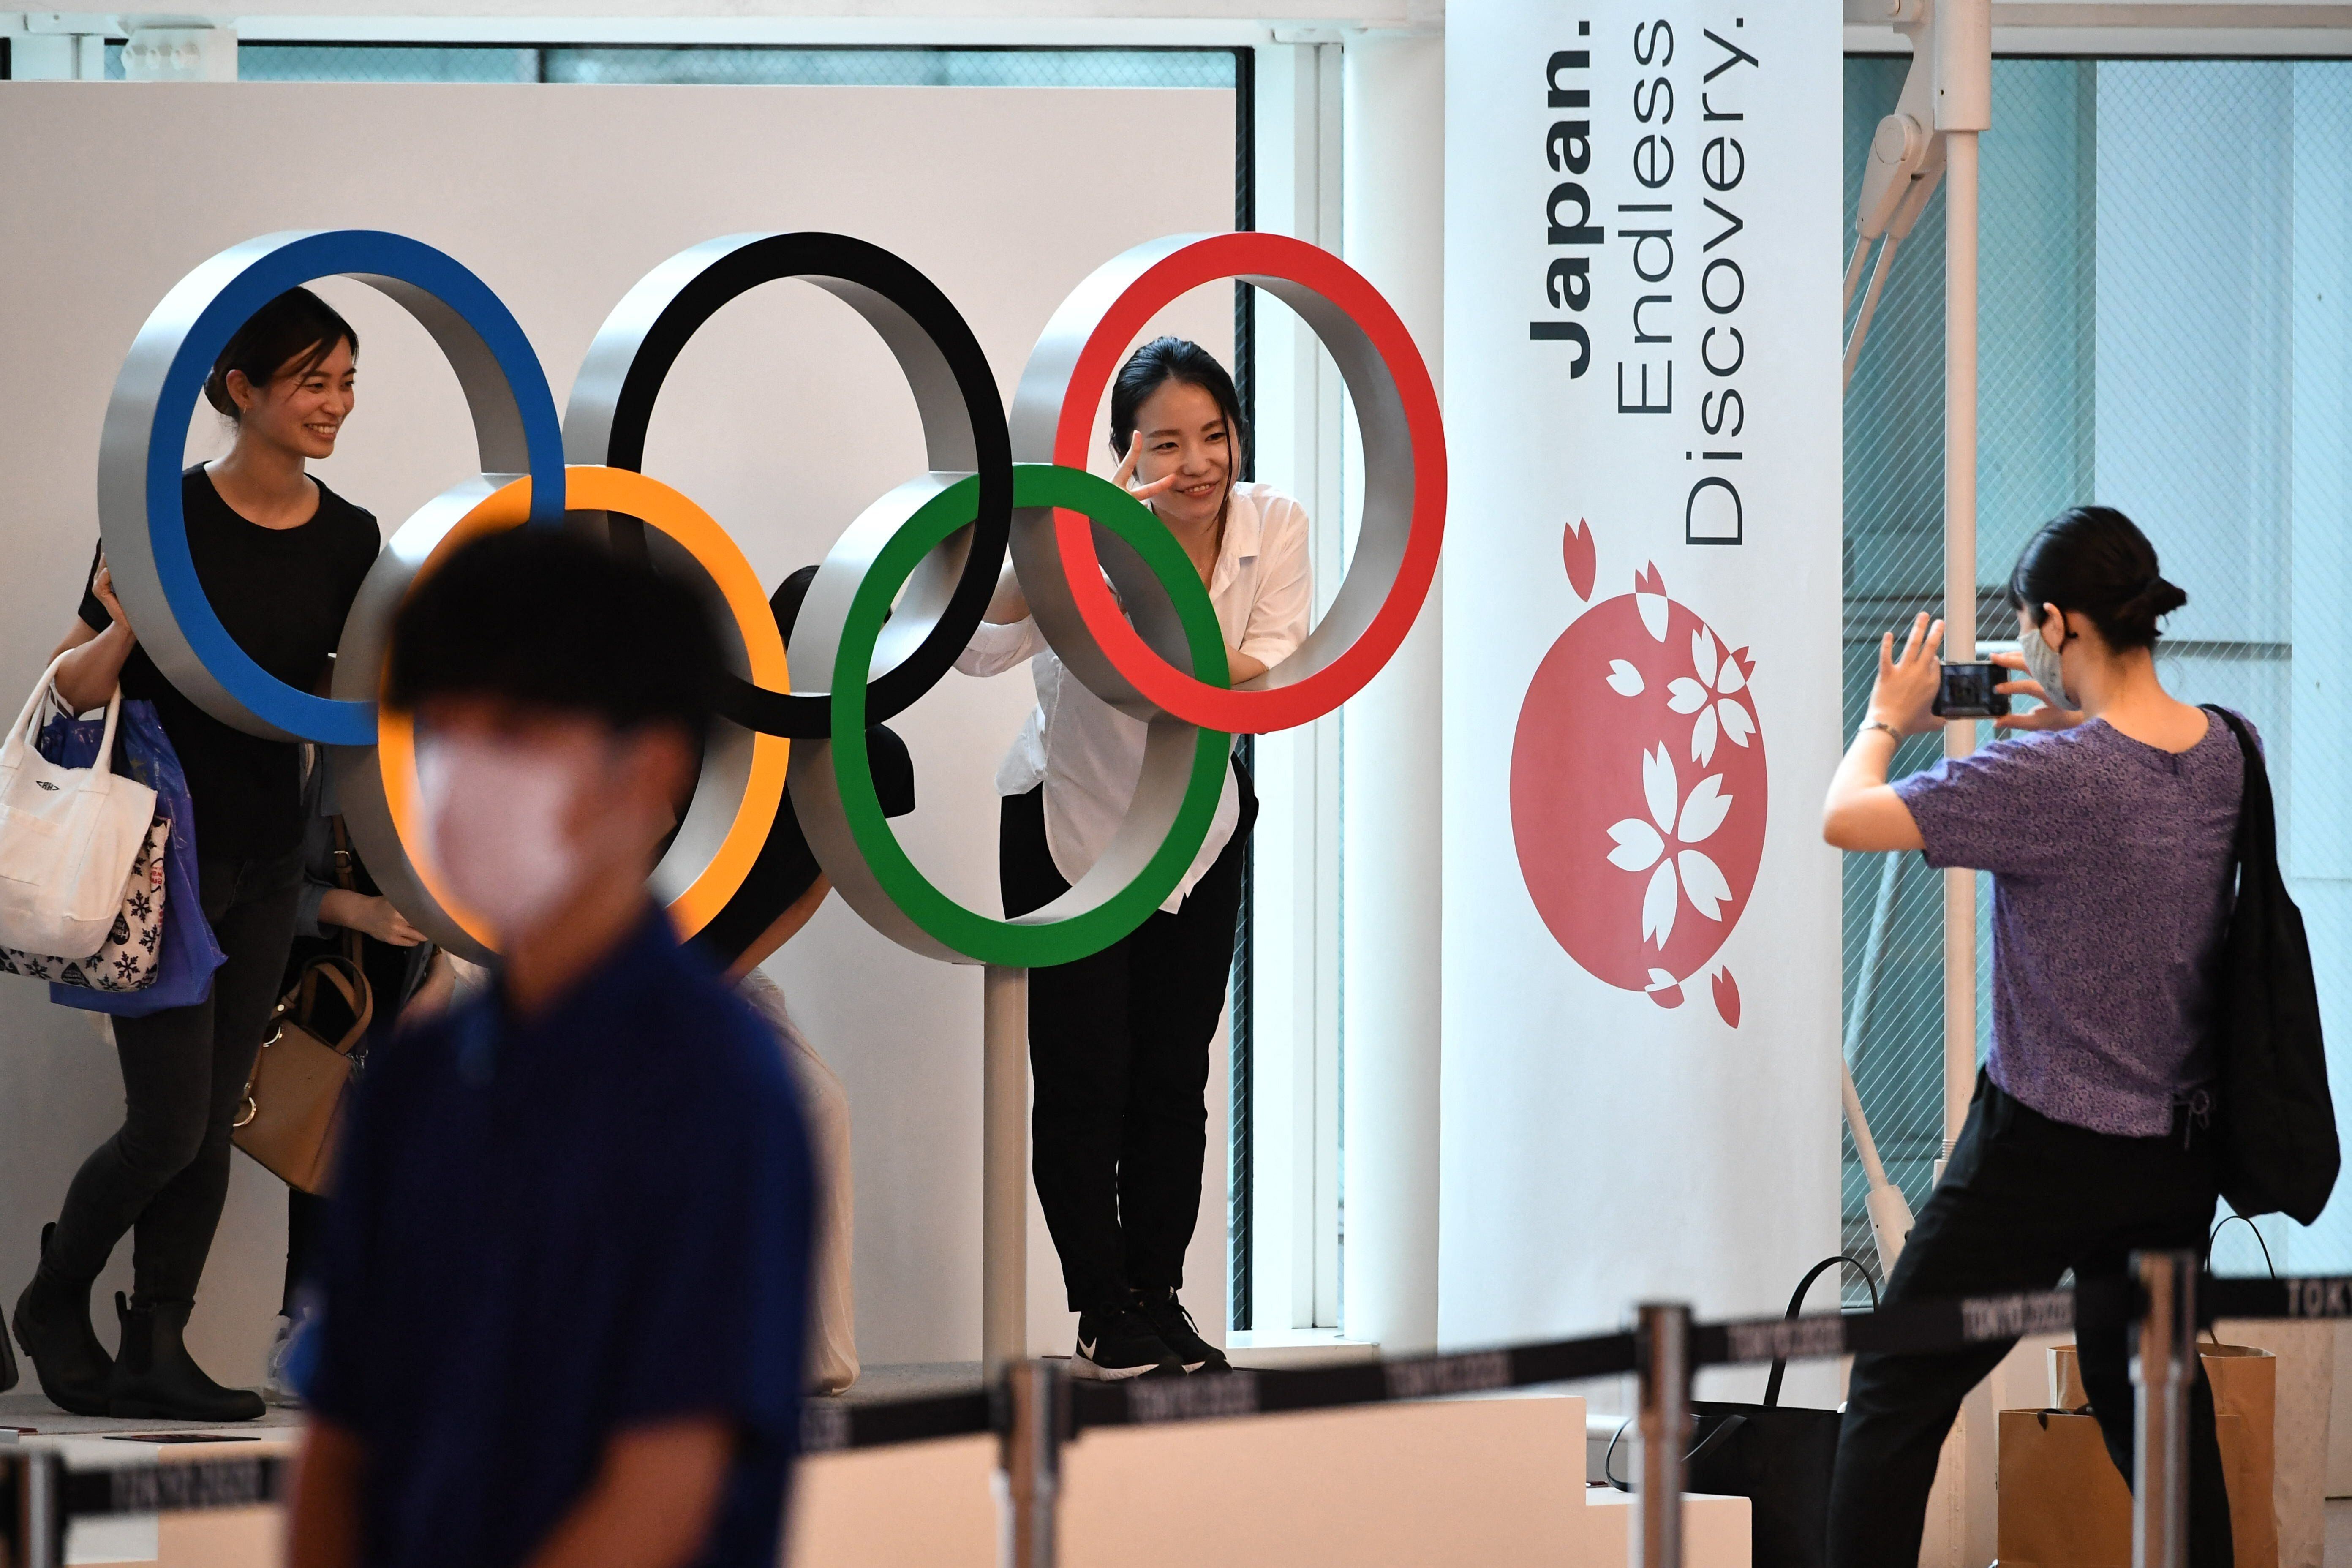 People take pictures with the Olympic rings displayed at the arrival lobby in the Tokyo International Airport in Tokyo on Thu